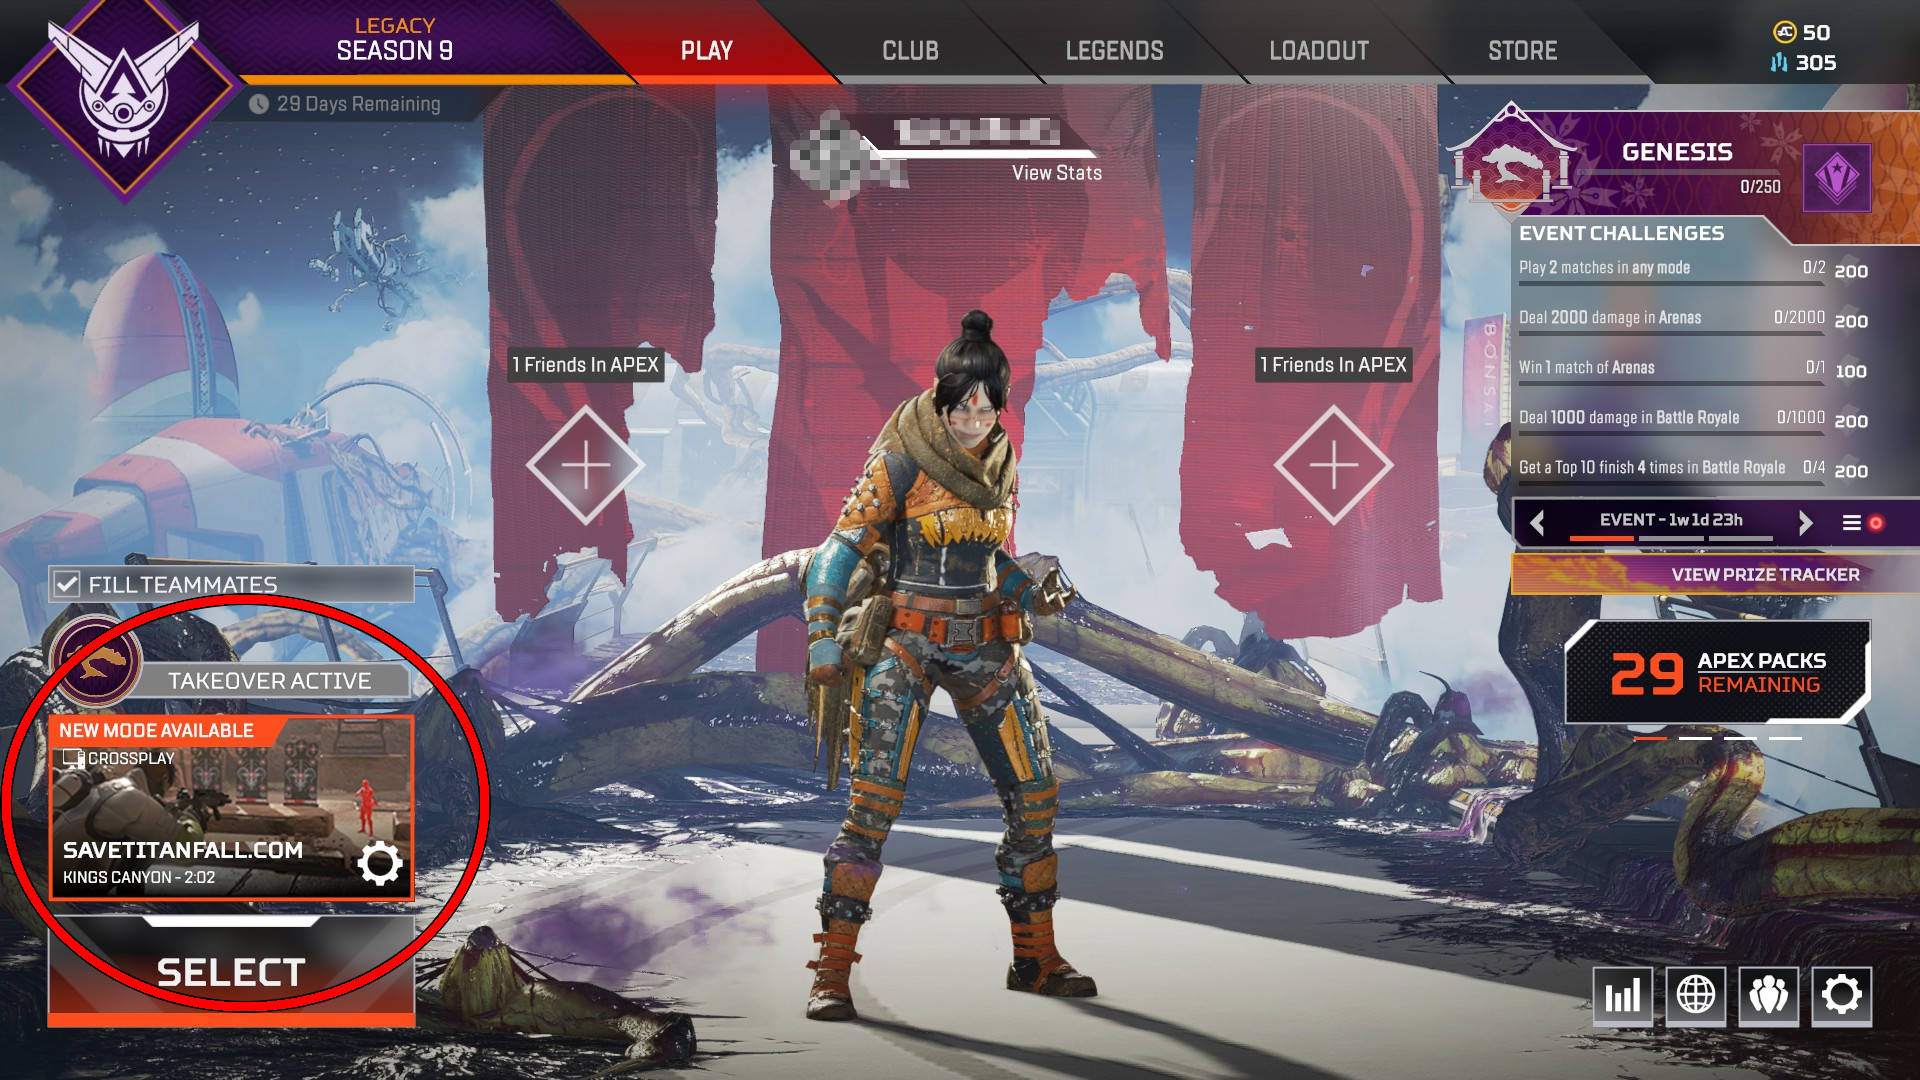 Apex Legends Hacked Saved Titanfall Message in-game